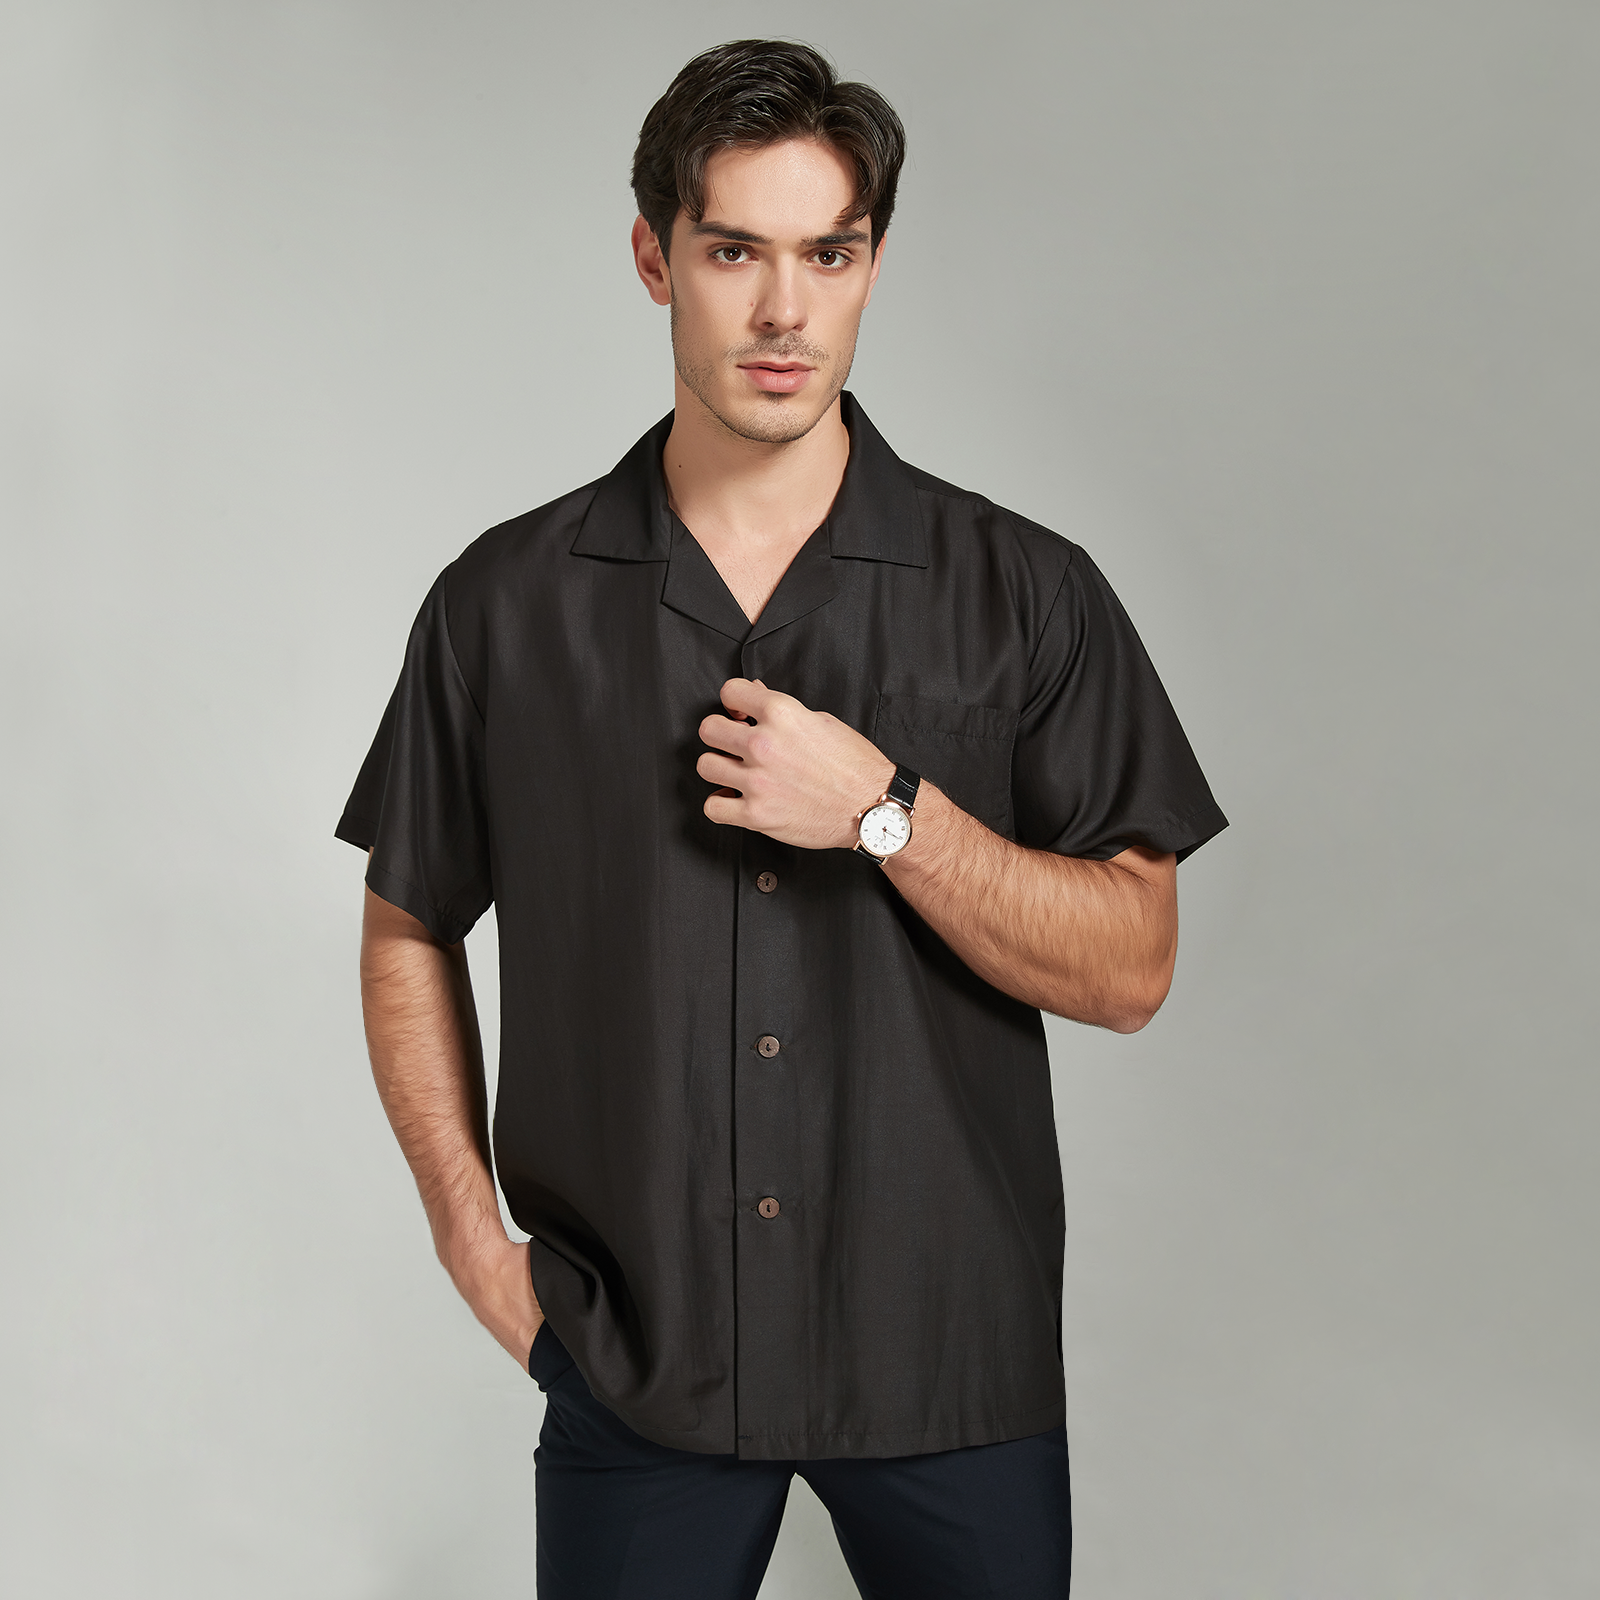 Wrinkle-Free Pure Nature Silk Shirt V-Neck Short Sleeves REAL SILK LIFE